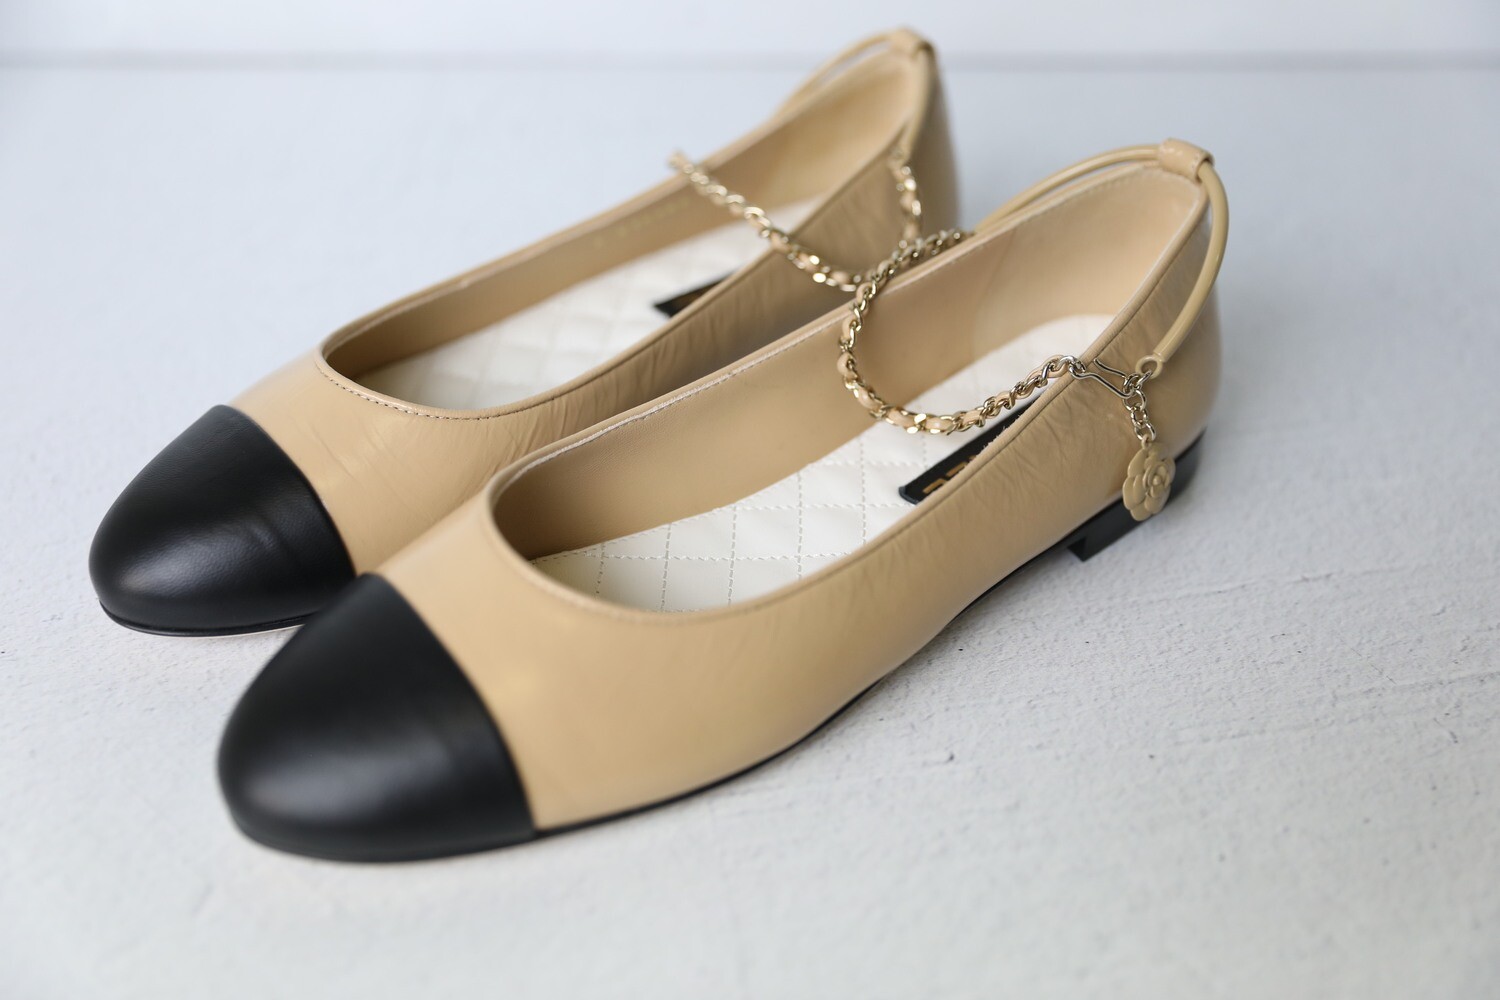 Chanel Ballet Flats with Ankle Strap, Beige and Black, Size 41, As New in  Box WA001 - Julia Rose Boston | Shop